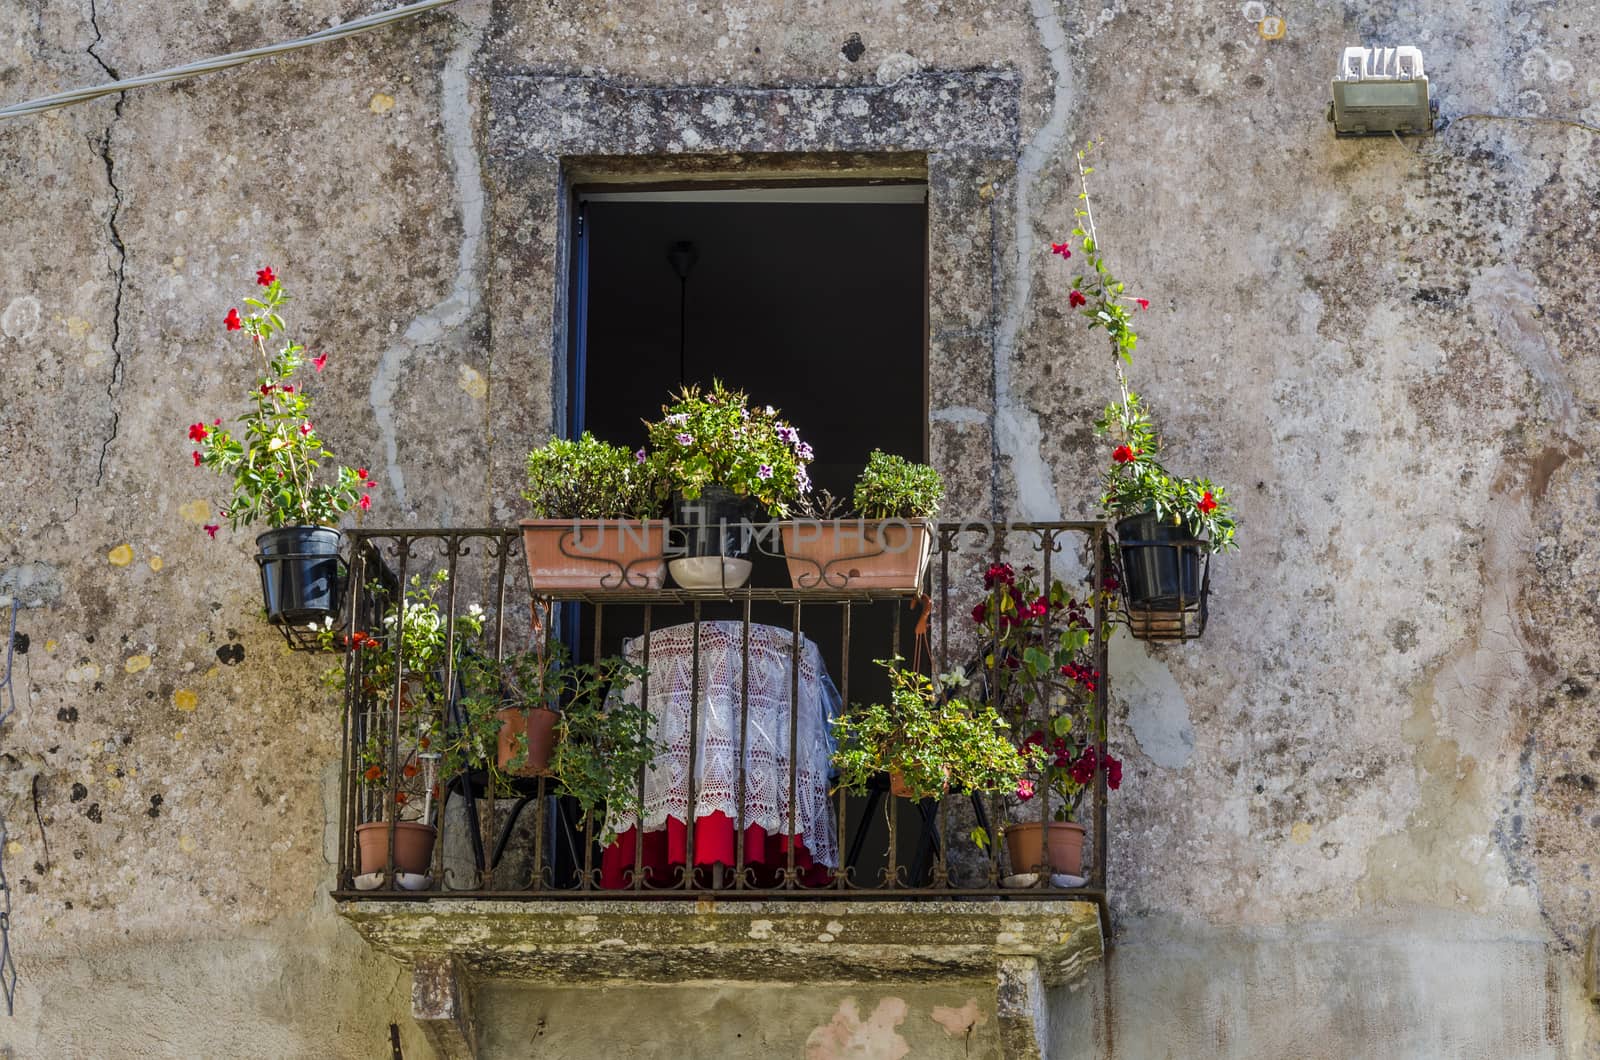 The years that erice has left its imprint in the different architectural styles that the city shows